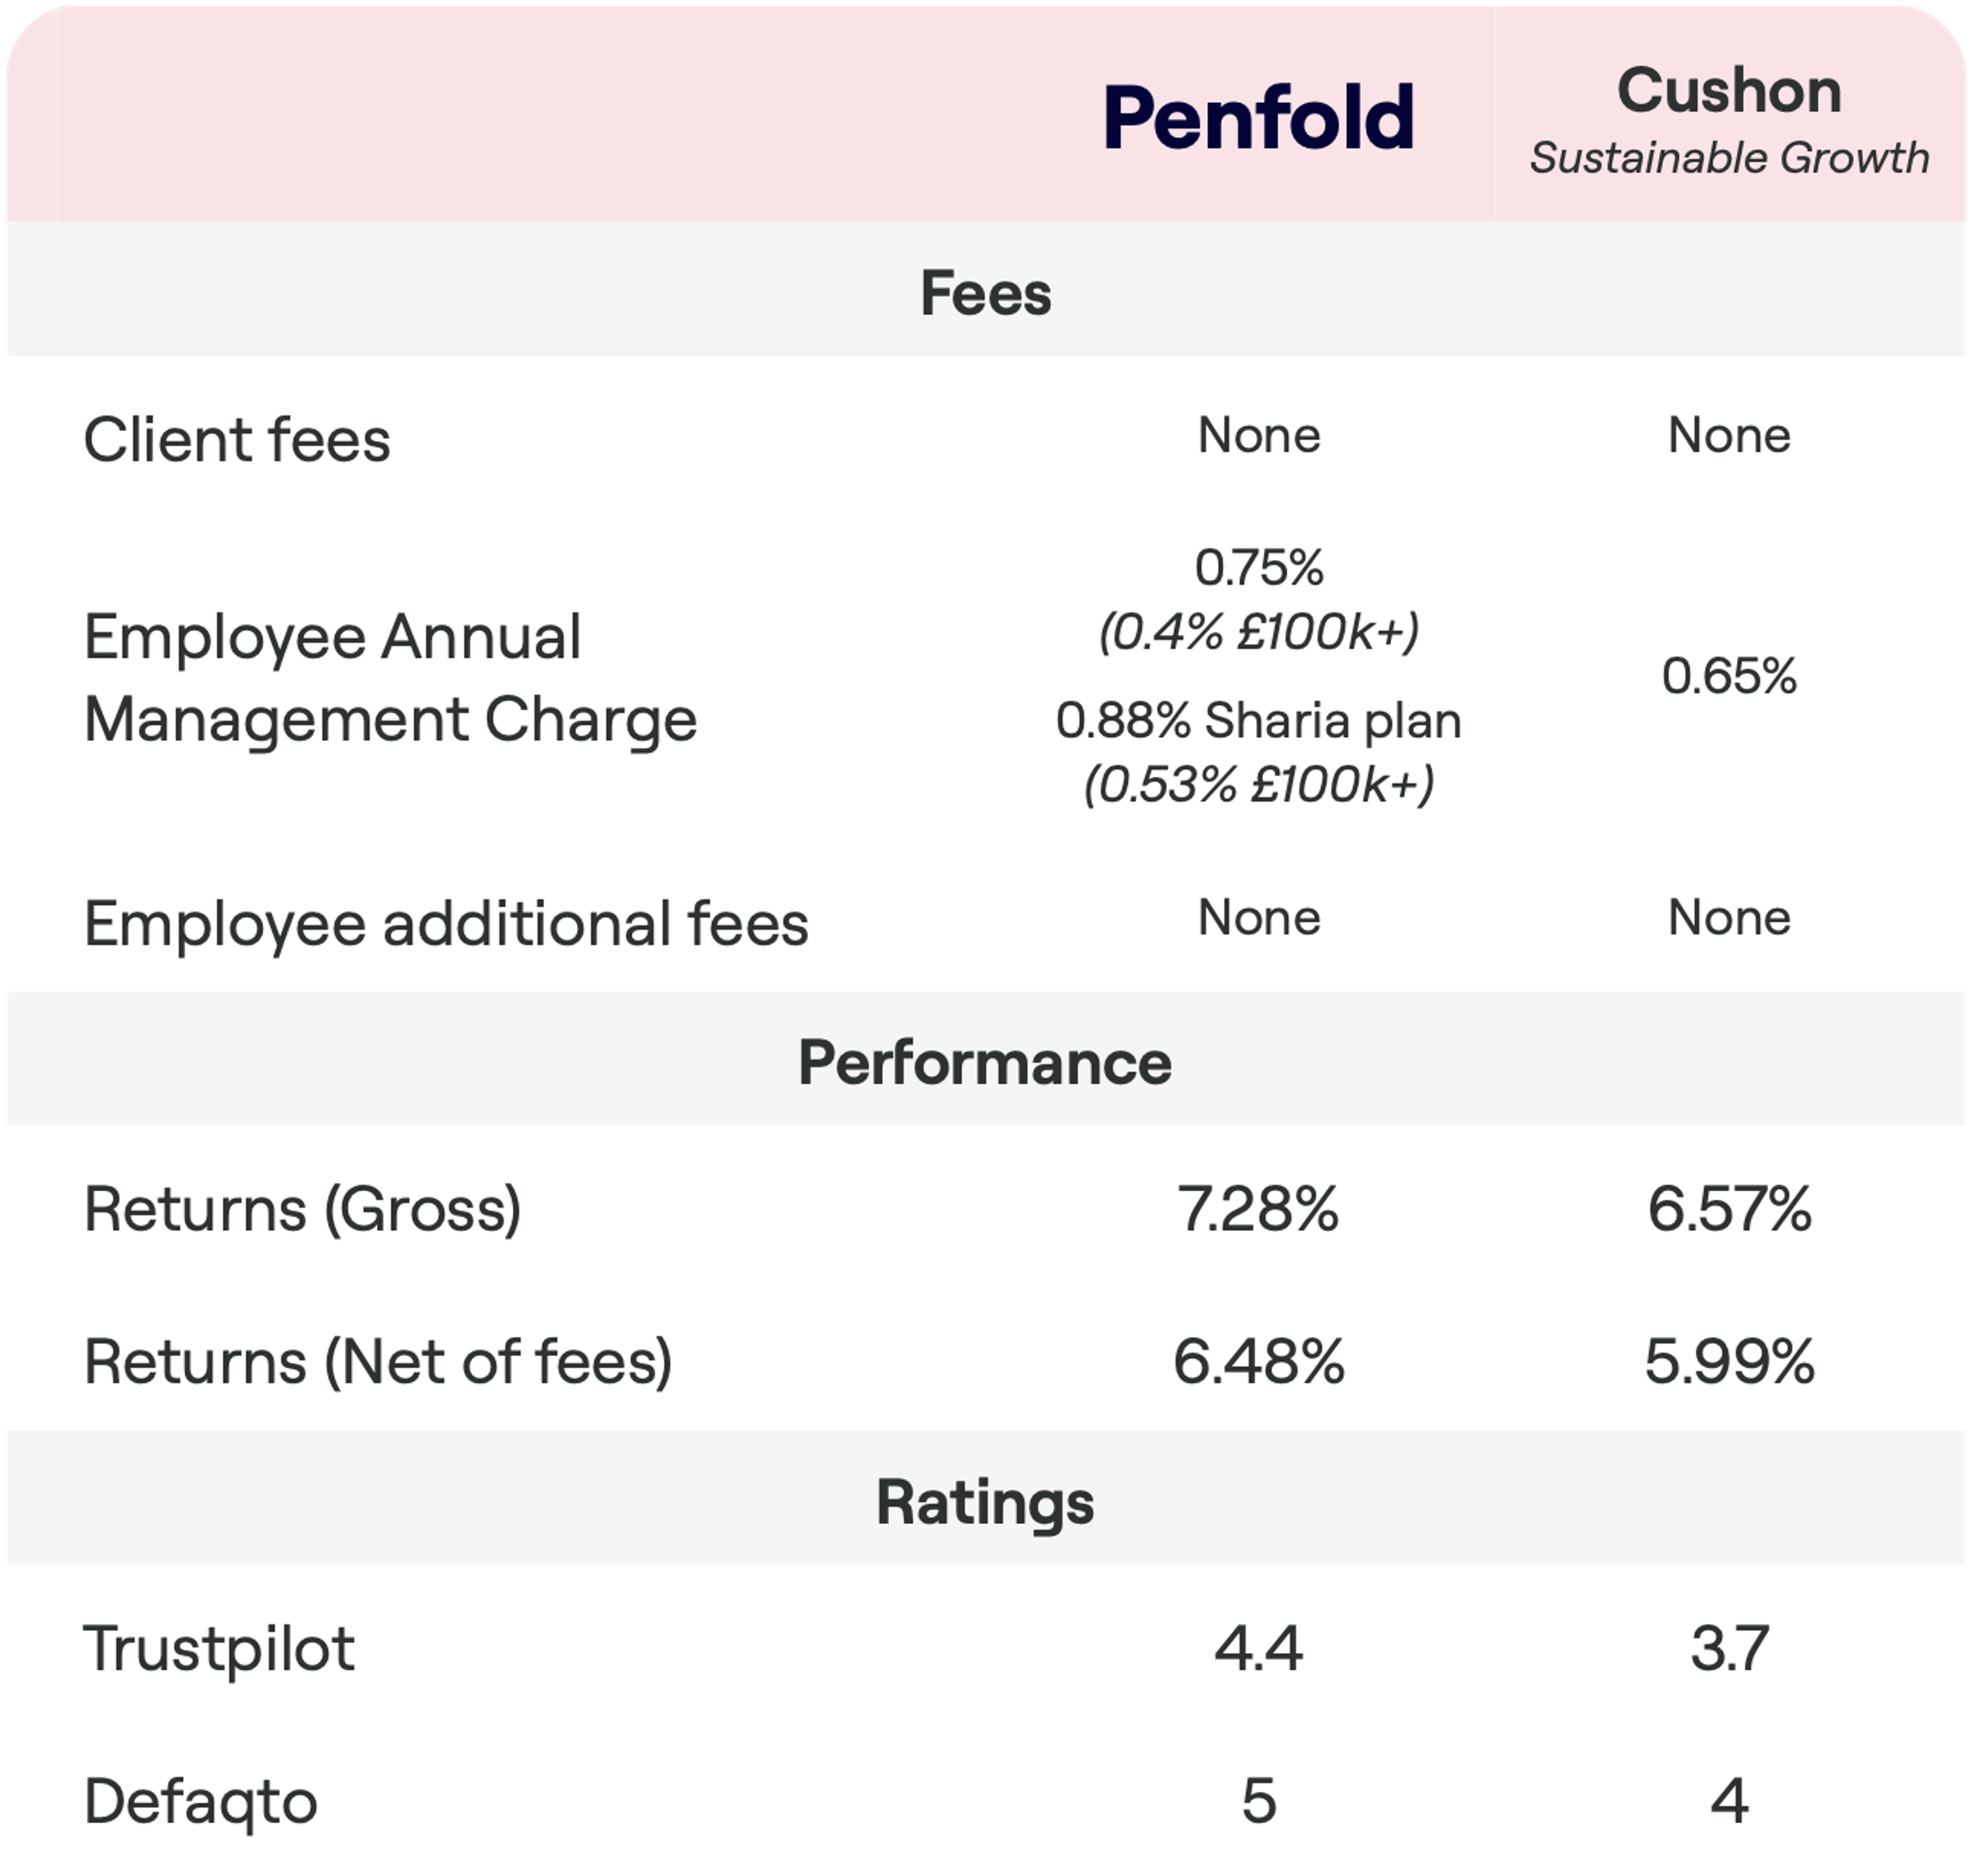 A comparison chart detailing fees, performance, and ratings for Penfold and Cushon under Sustainable Growth. Neither Penfold nor Cushon charge client fees. Penfold has an Employee Annual Management Charge of 0.75% (reduced to 0.4% for amounts over £100k) and for the Sharia plan 0.88% (reduced to 0.53% for over £100k), while Cushon charges 0.65%. Both have no additional employee fees. Penfold's returns are 4.29% gross and 3.51% net of fees, whereas Cushon's are 3.99% gross and 3.42% net. Trustpilot rates Penfold at 4.3 and Cushon at 3.4, with both having a Defaqto rating of 4.